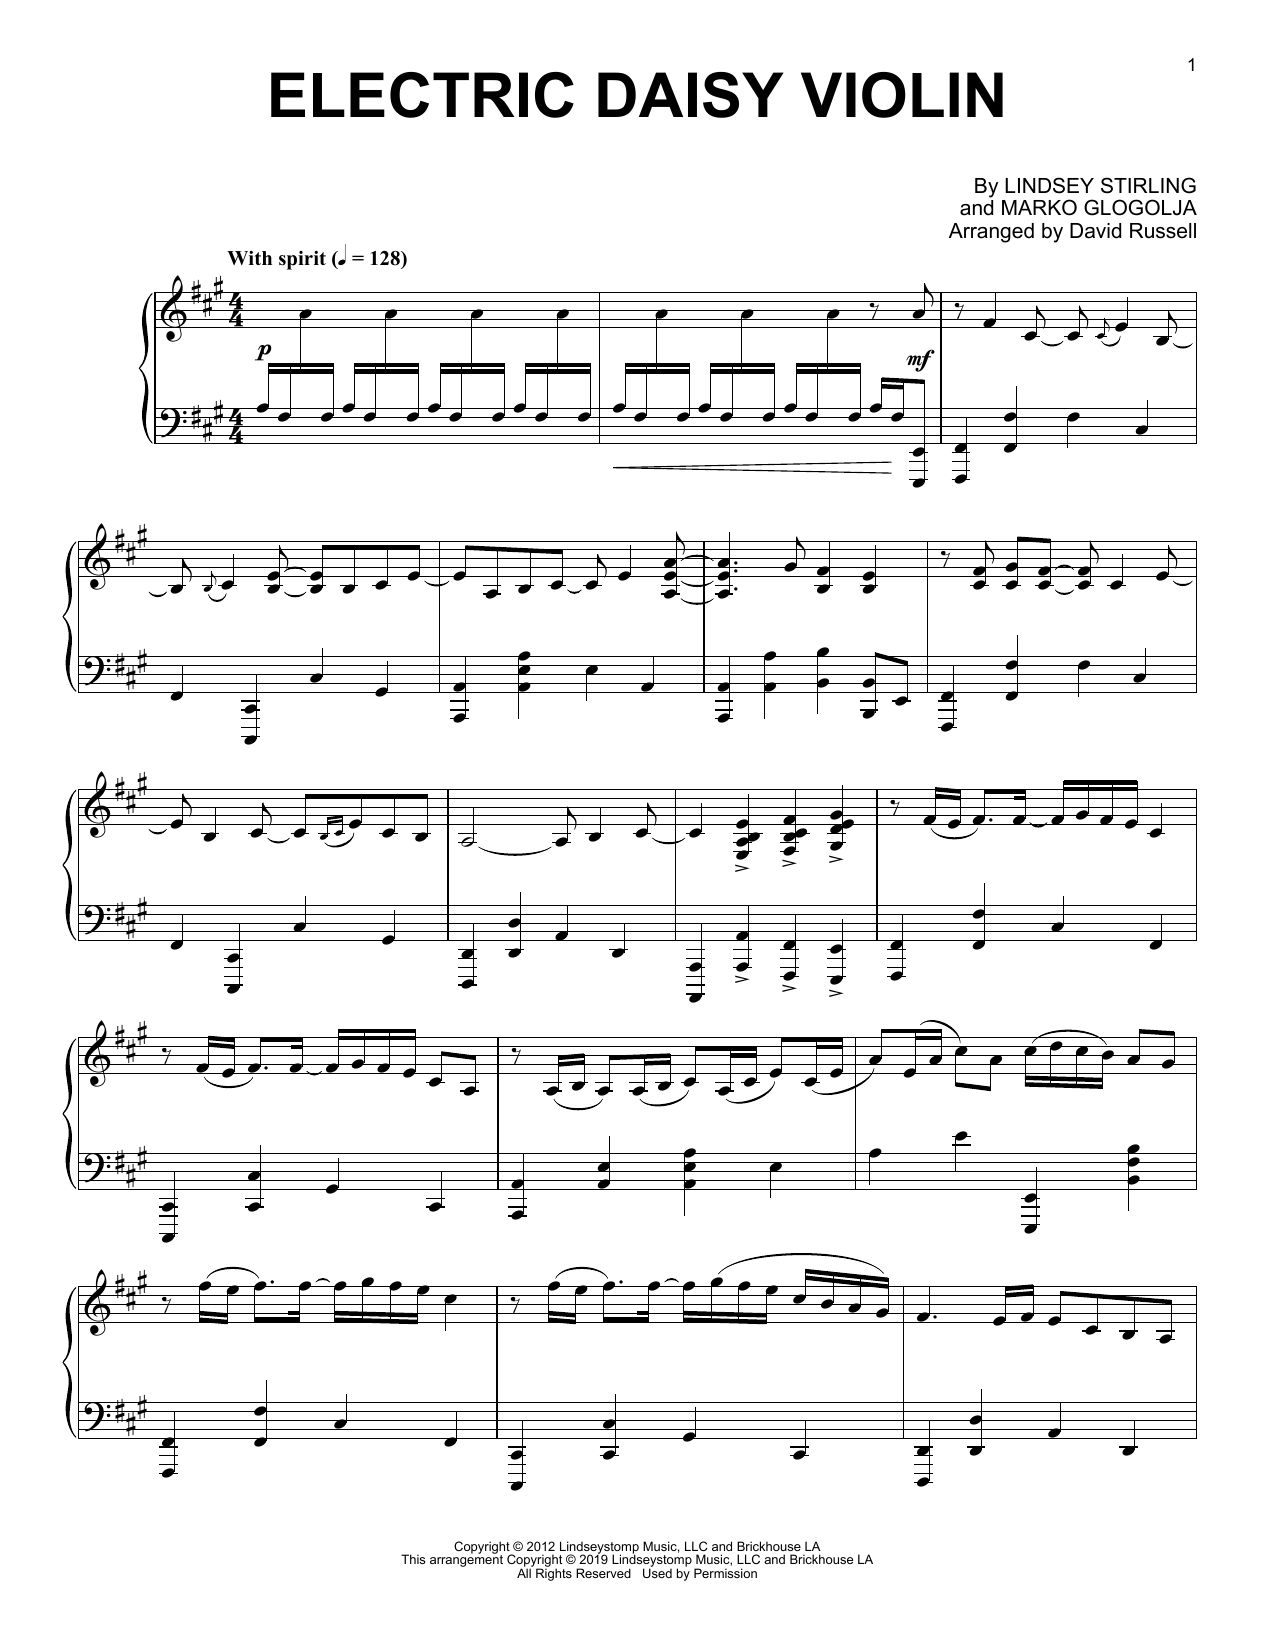 Download Lindsey Stirling Electric Daisy Violin Sheet Music